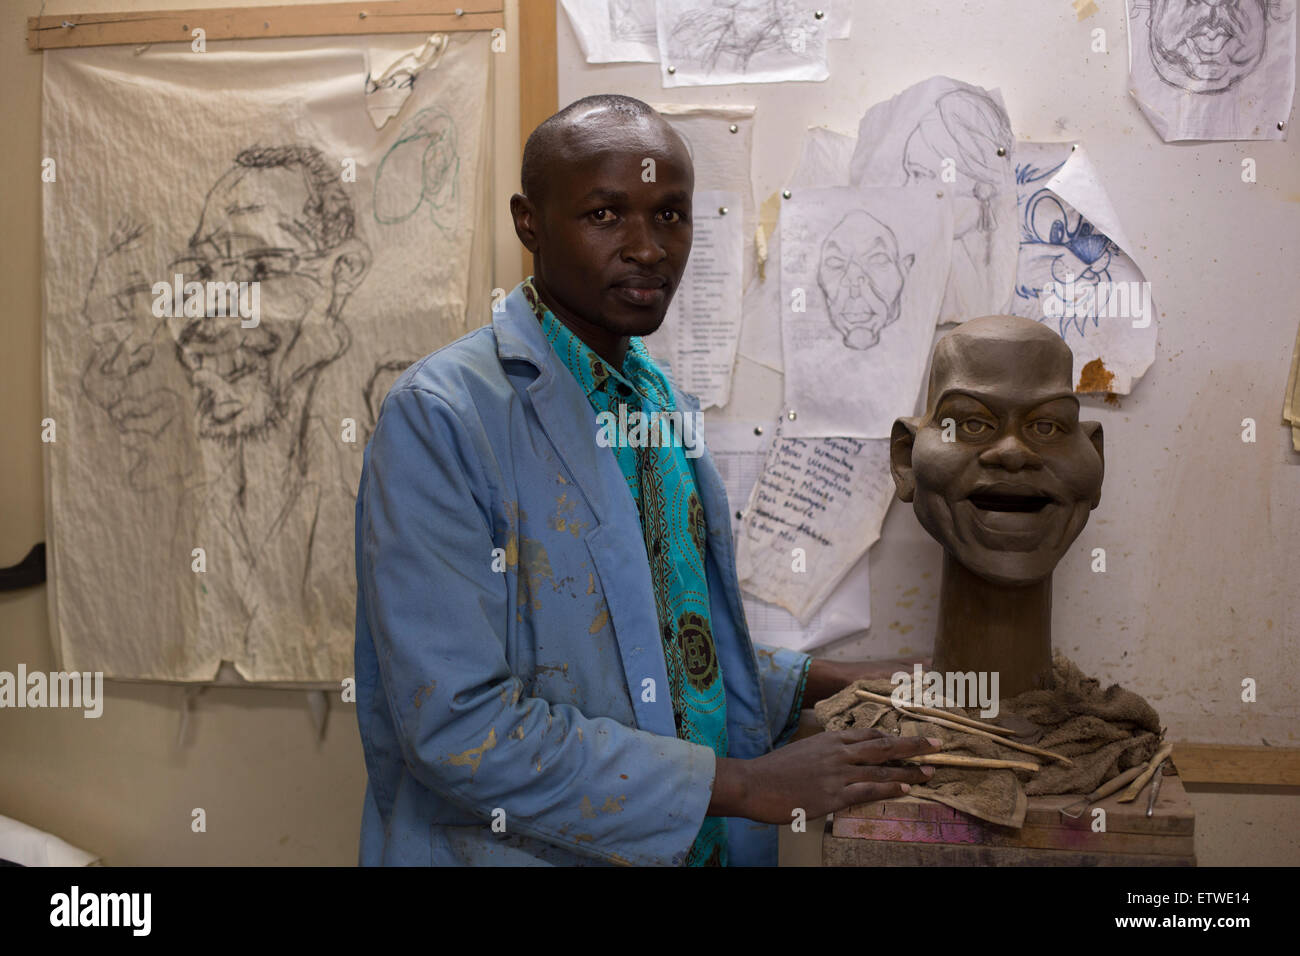 Sculptor Eric Mokua pose with a clay model of US First Lady Michelle Obama at the GoDown Arts Centre , 26 February 2013 where the satirical television program, The XYZ Show is produced. A satirical television program, The XYZ Show comments on current political and social affairs in Kenya through the use of latex puppets resembling prominent figures.On The XYZ Show, national leaders in Kenya are lampooned with the purpose of using humour to address difficult and controversial national issues while promoting transparency in government.  The XYZ Show is modelled after the UKÕs ÒSpitting ImageÓ an Stock Photo